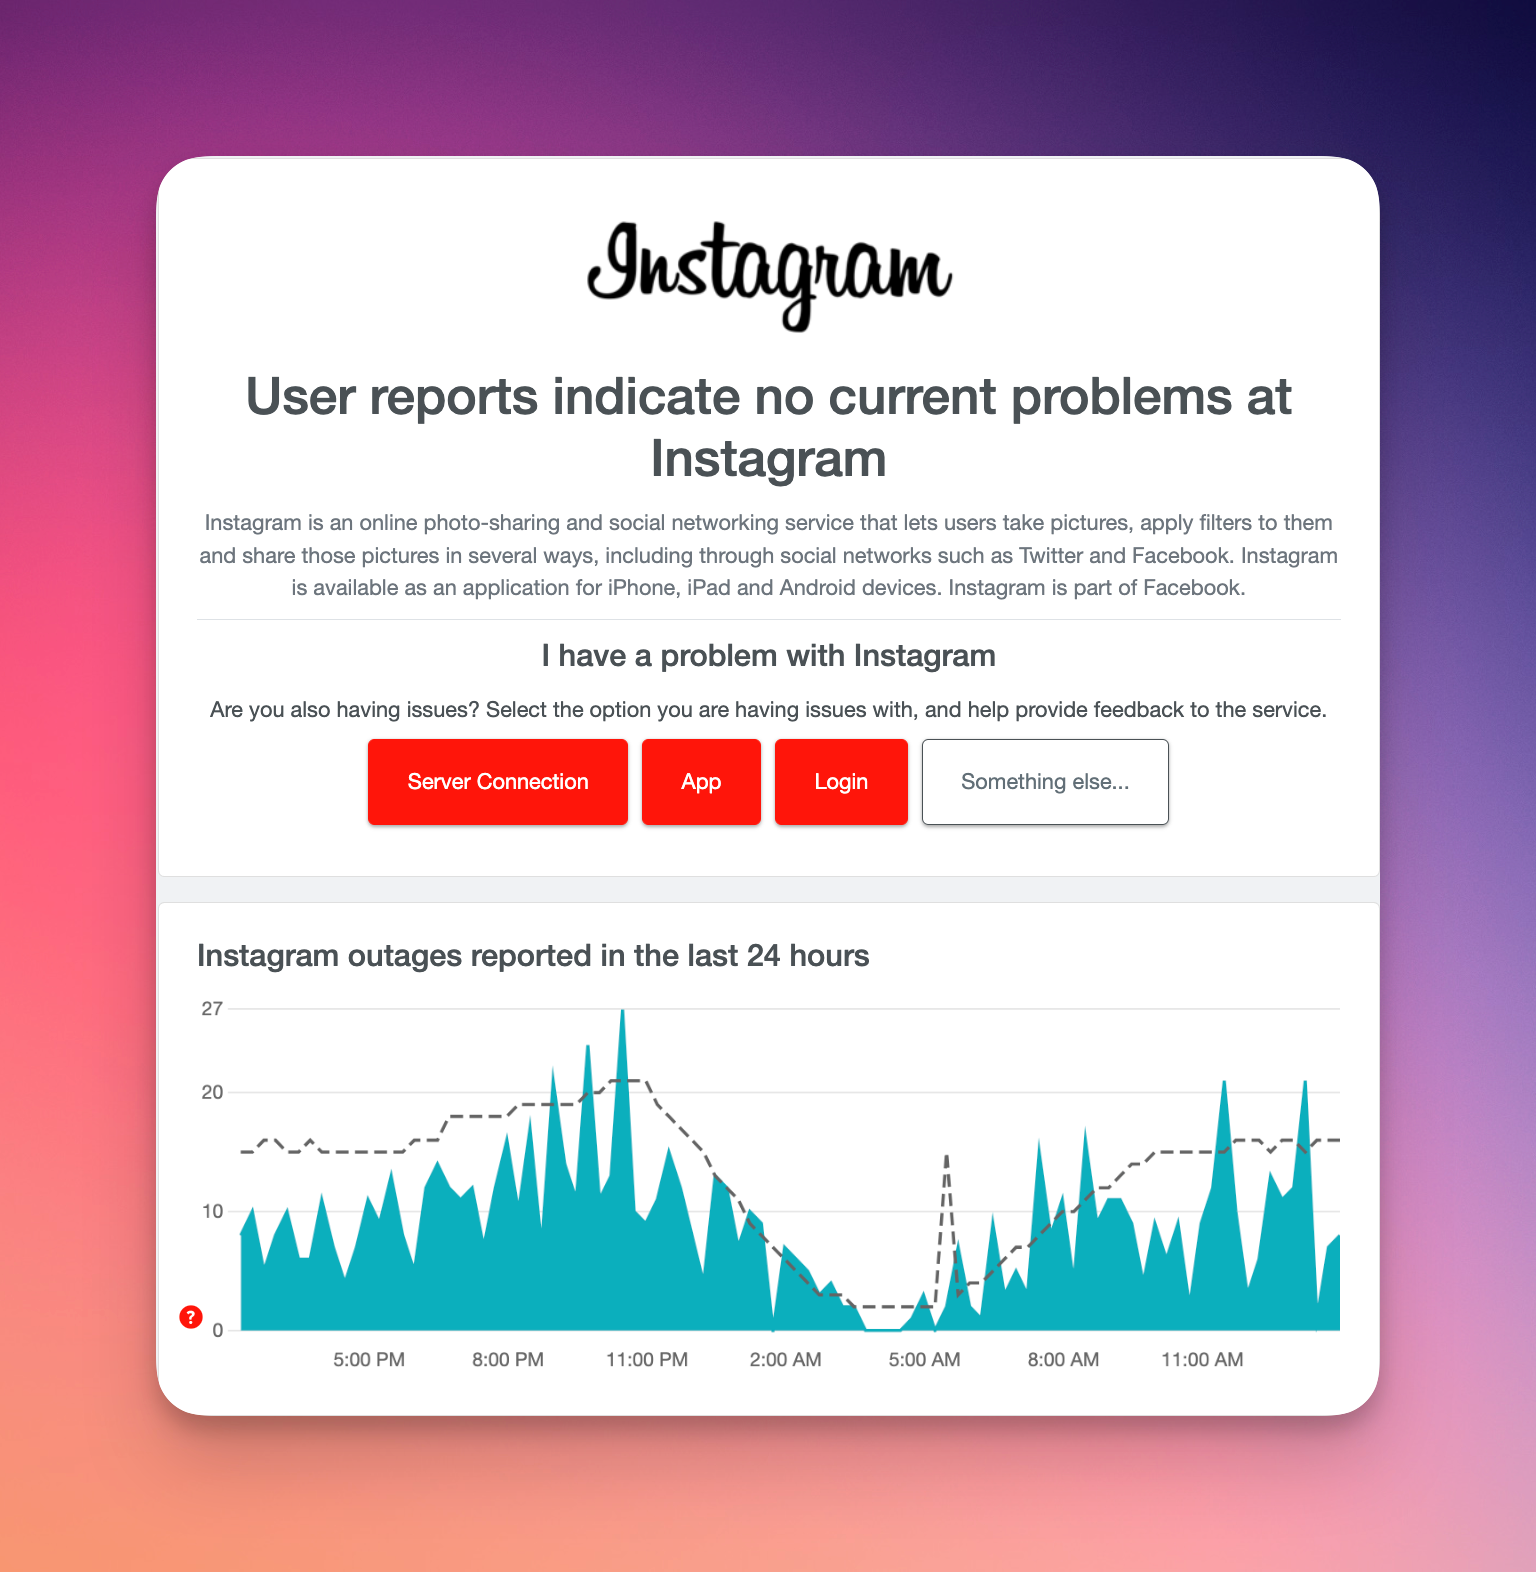 Remote.tools shows the Instagram status on down detector